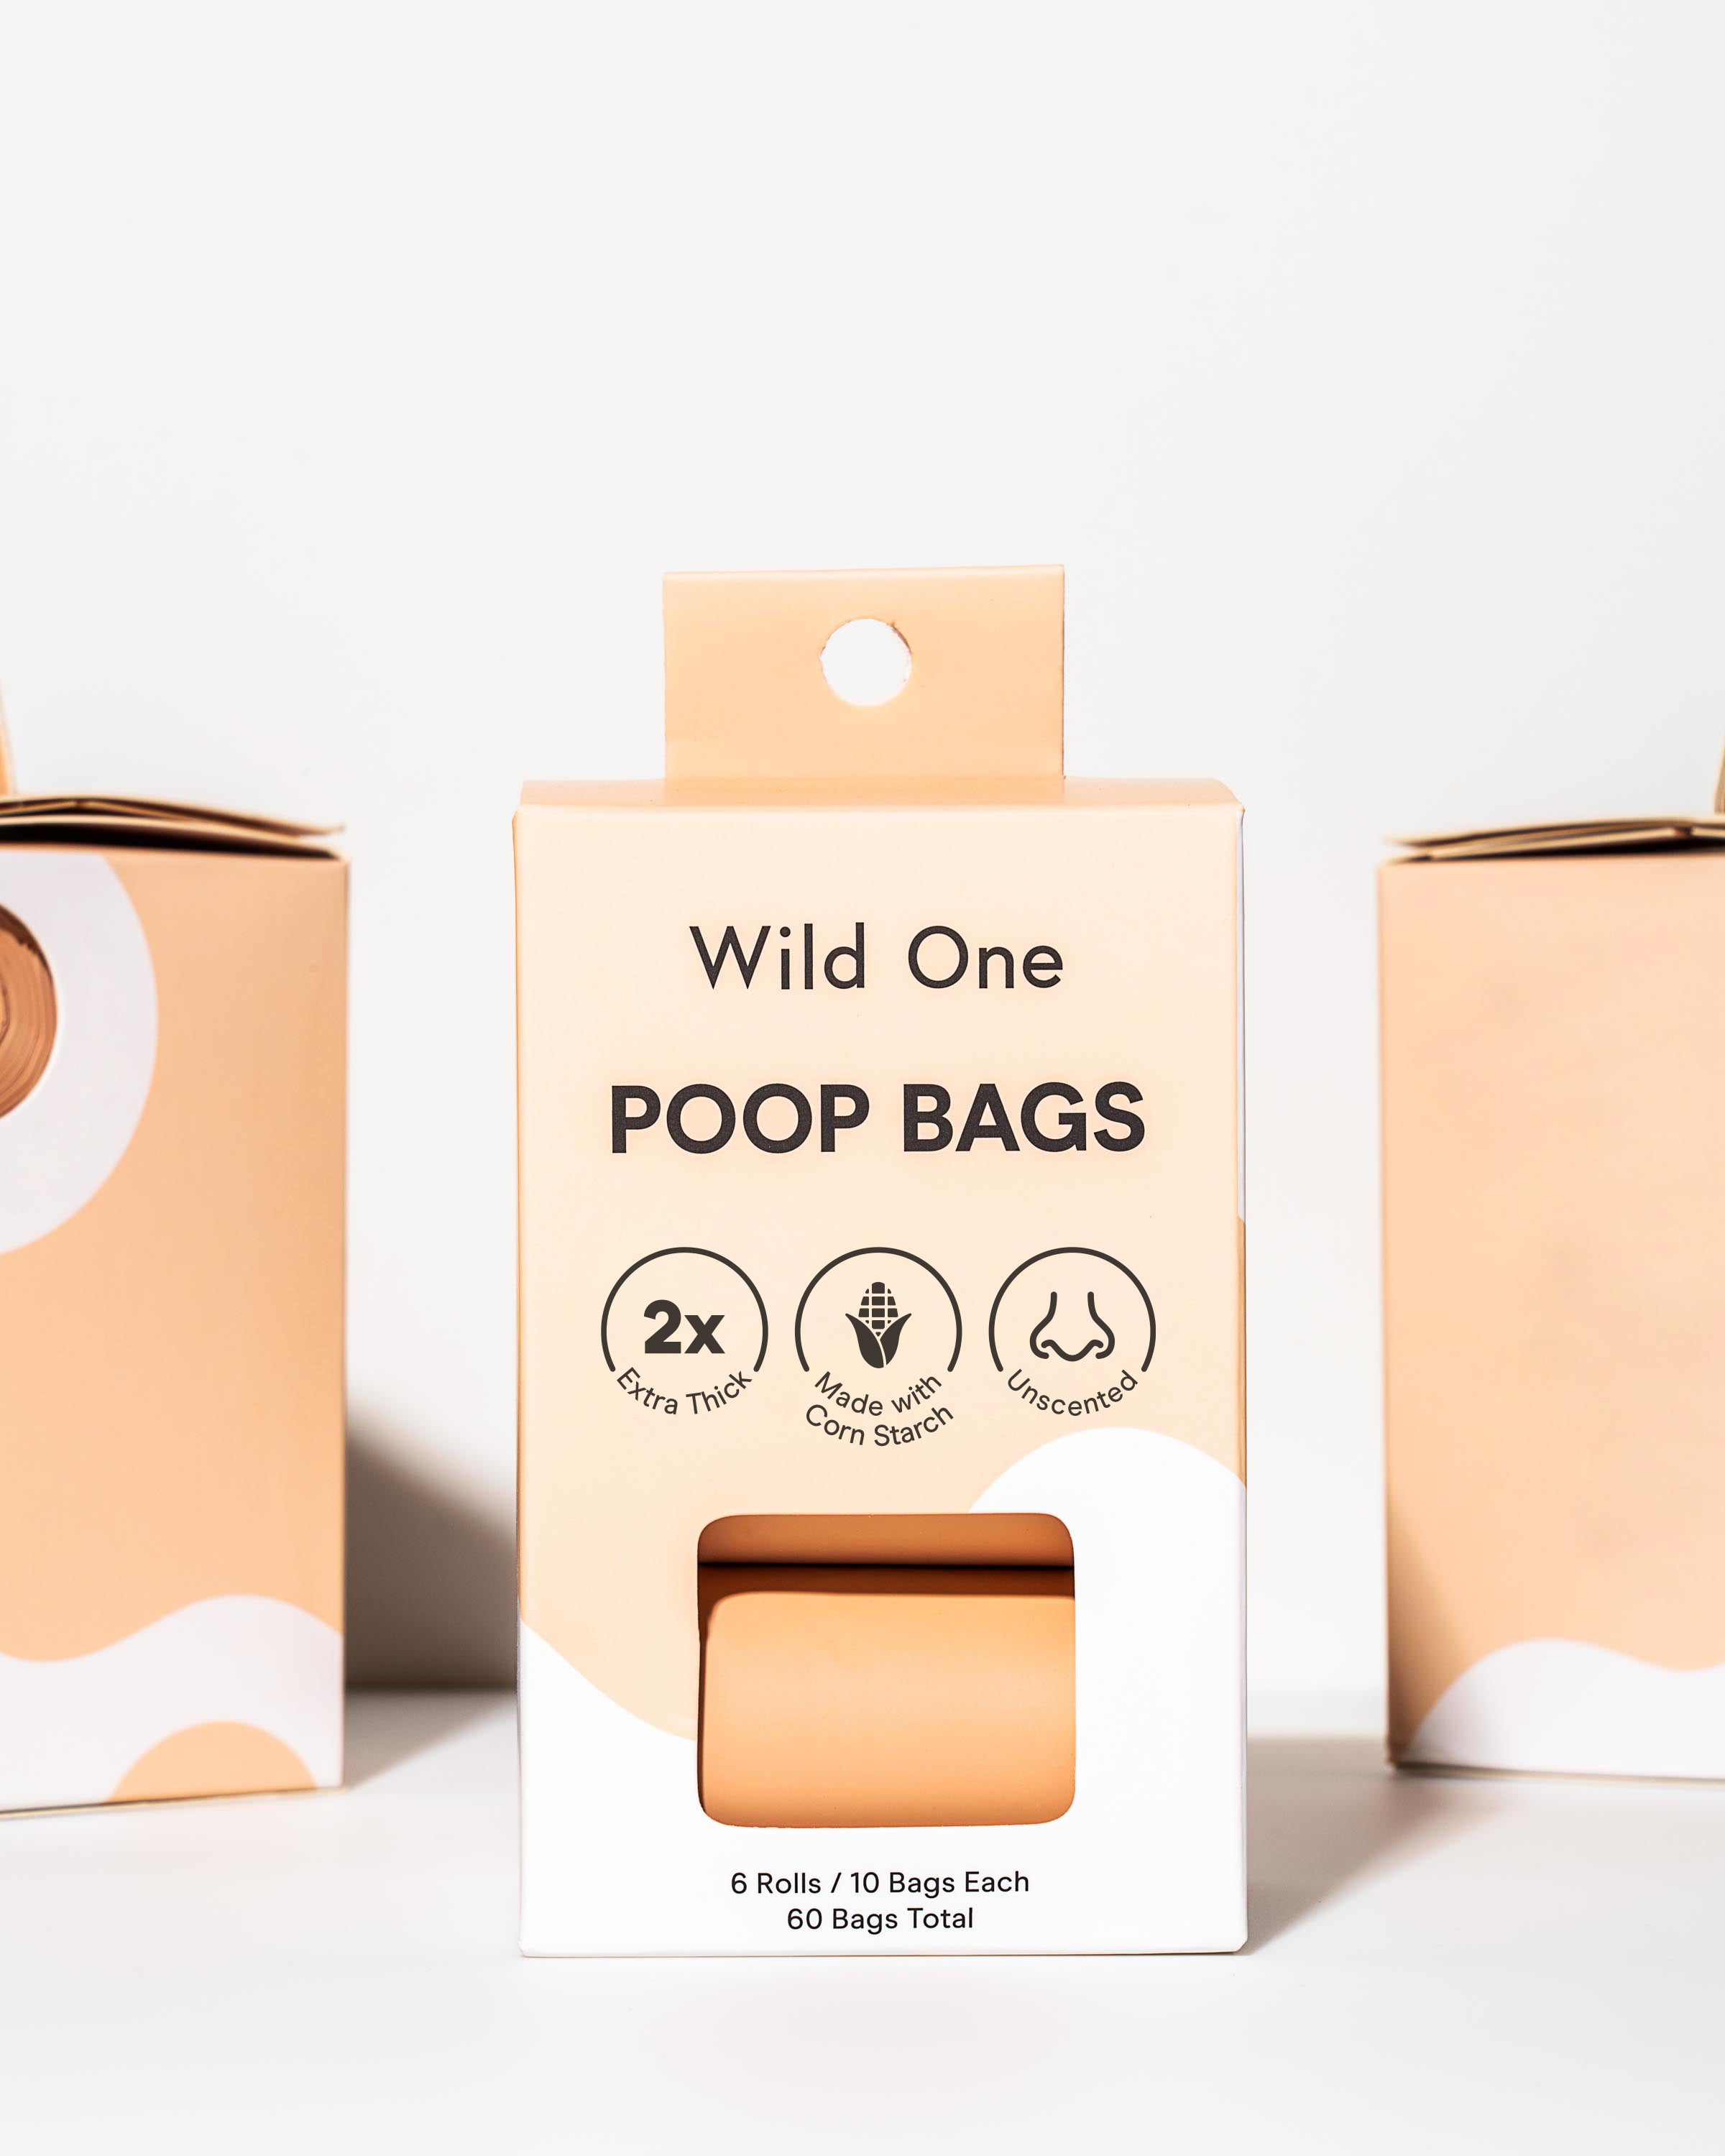 Home Compostable Pet Waste Bags - Small Rolled Handle Bags - 60